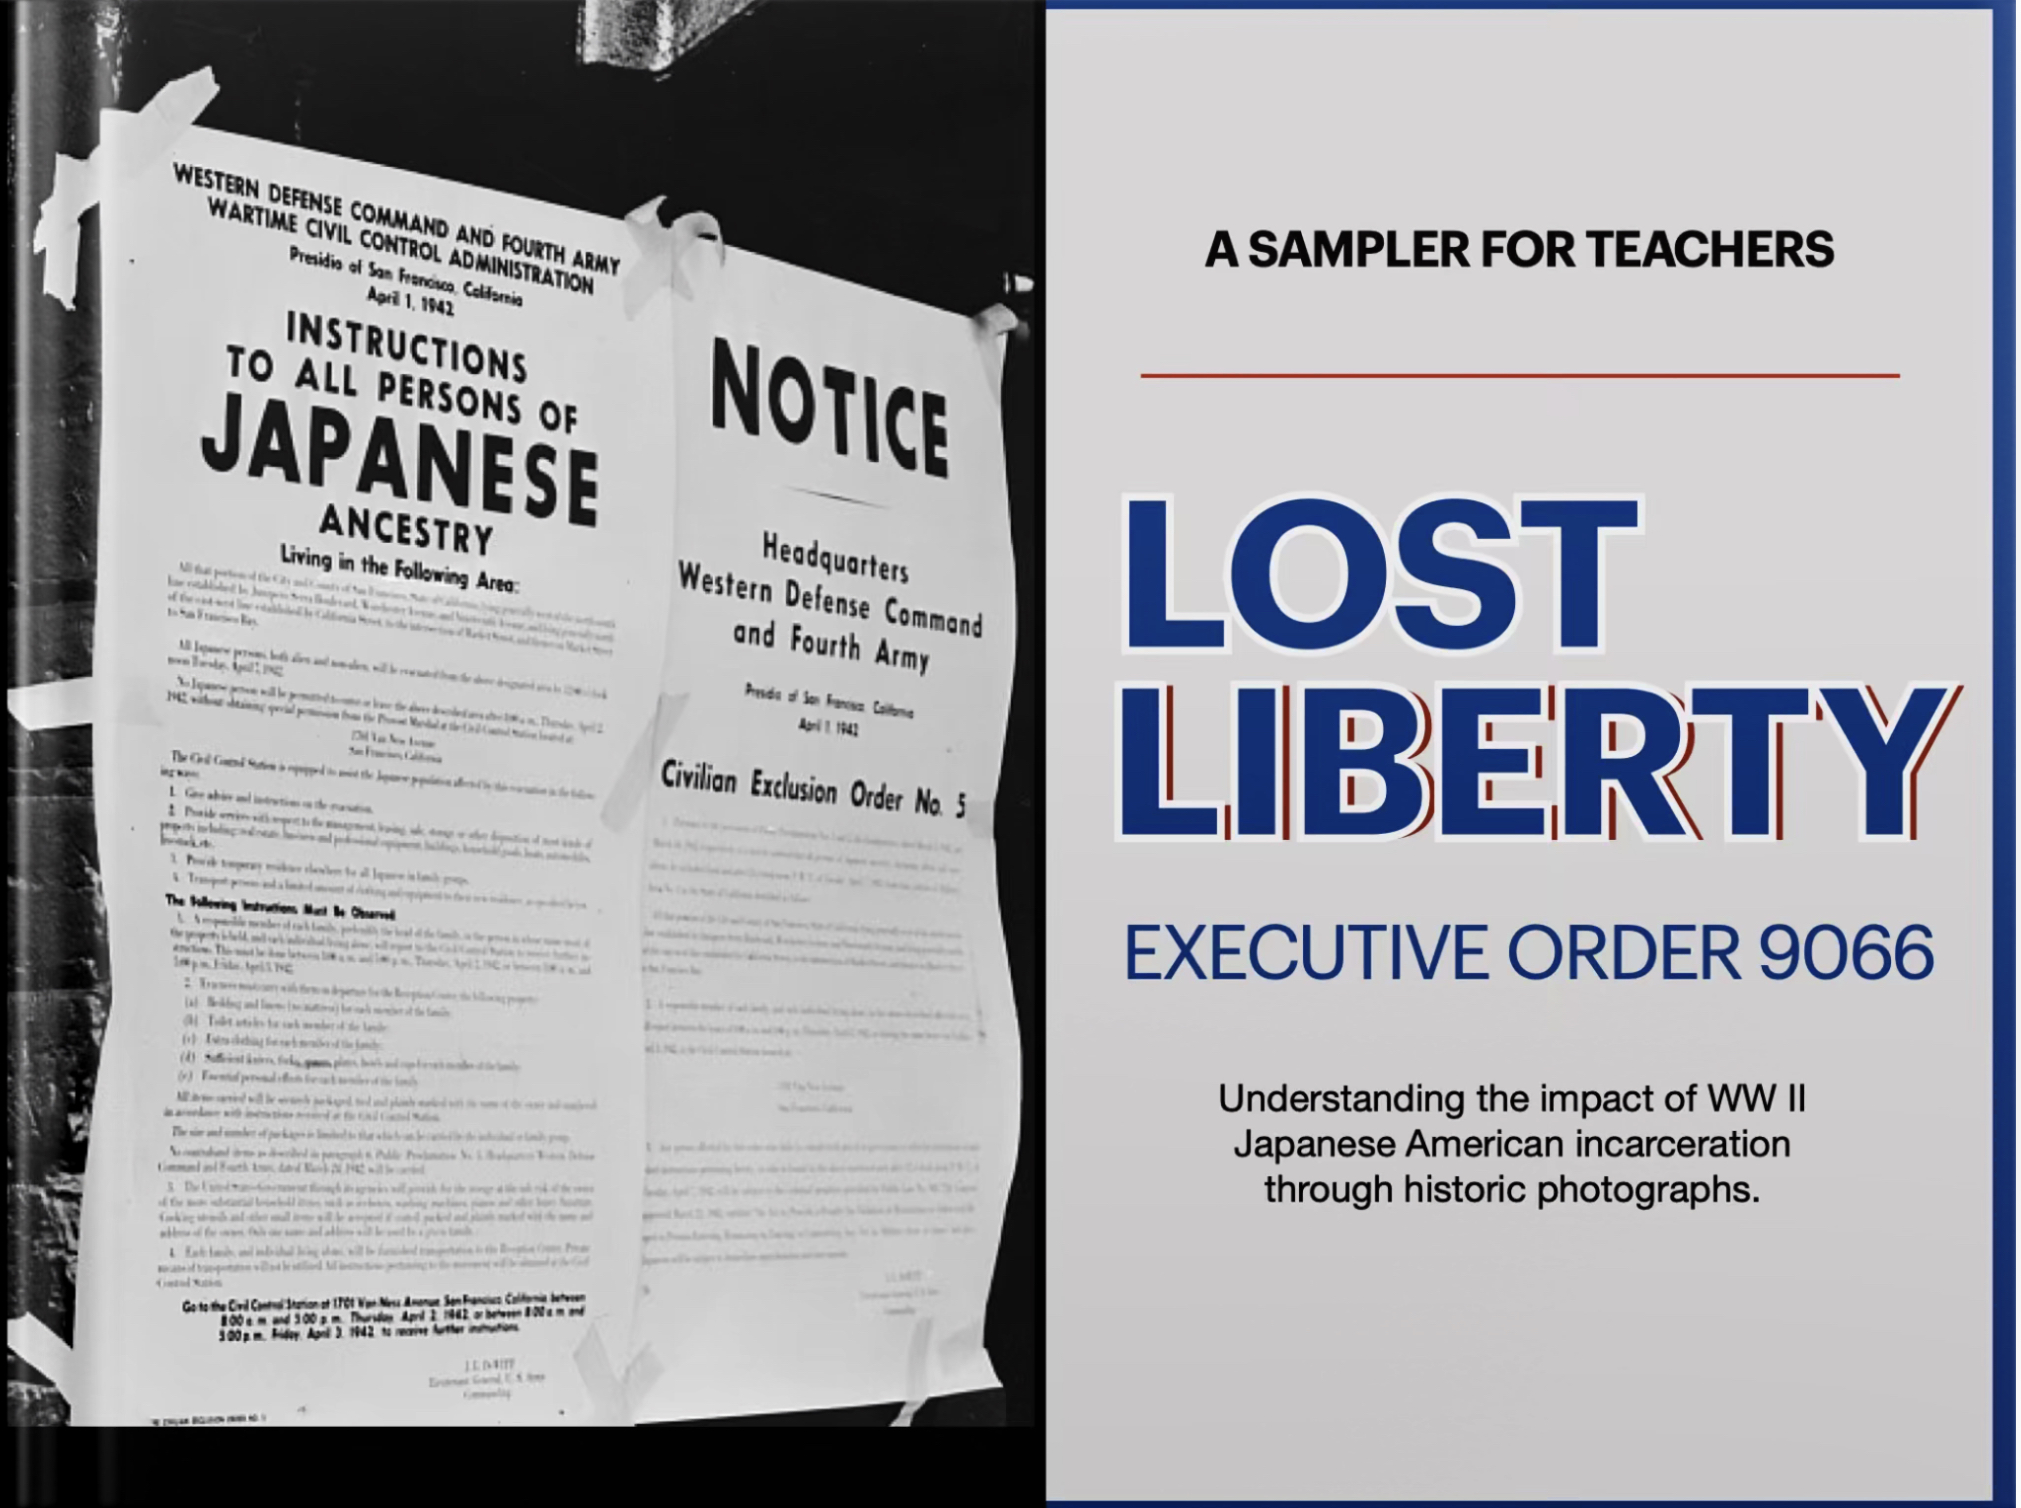 Book Cover - Lost Liberty - Published to the Apple Book Store via Pages